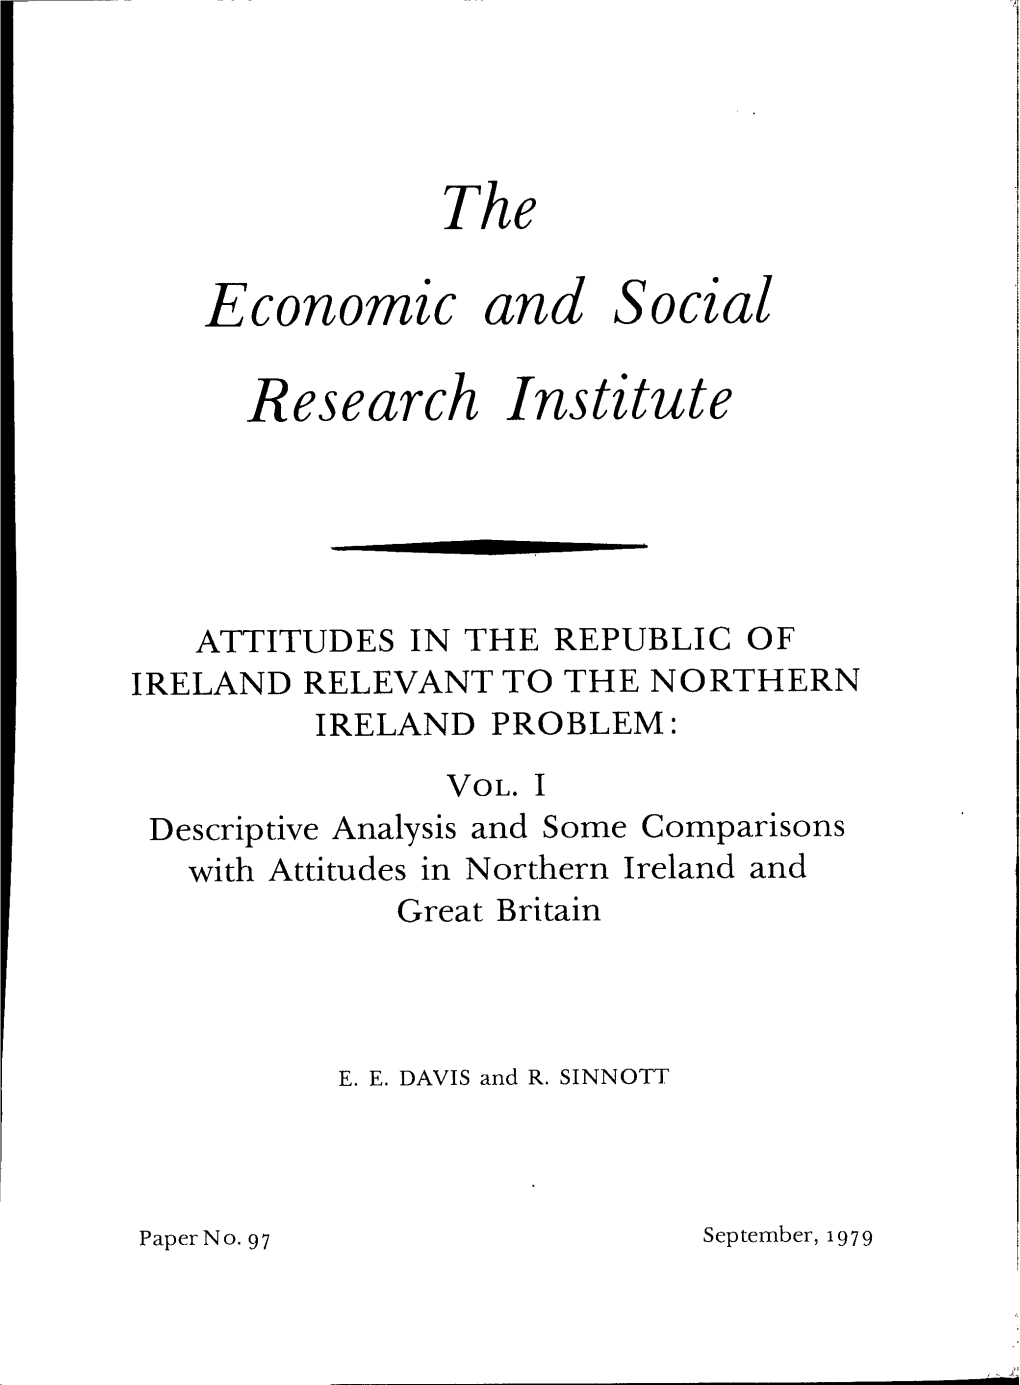 The Economic and Social Research Institute